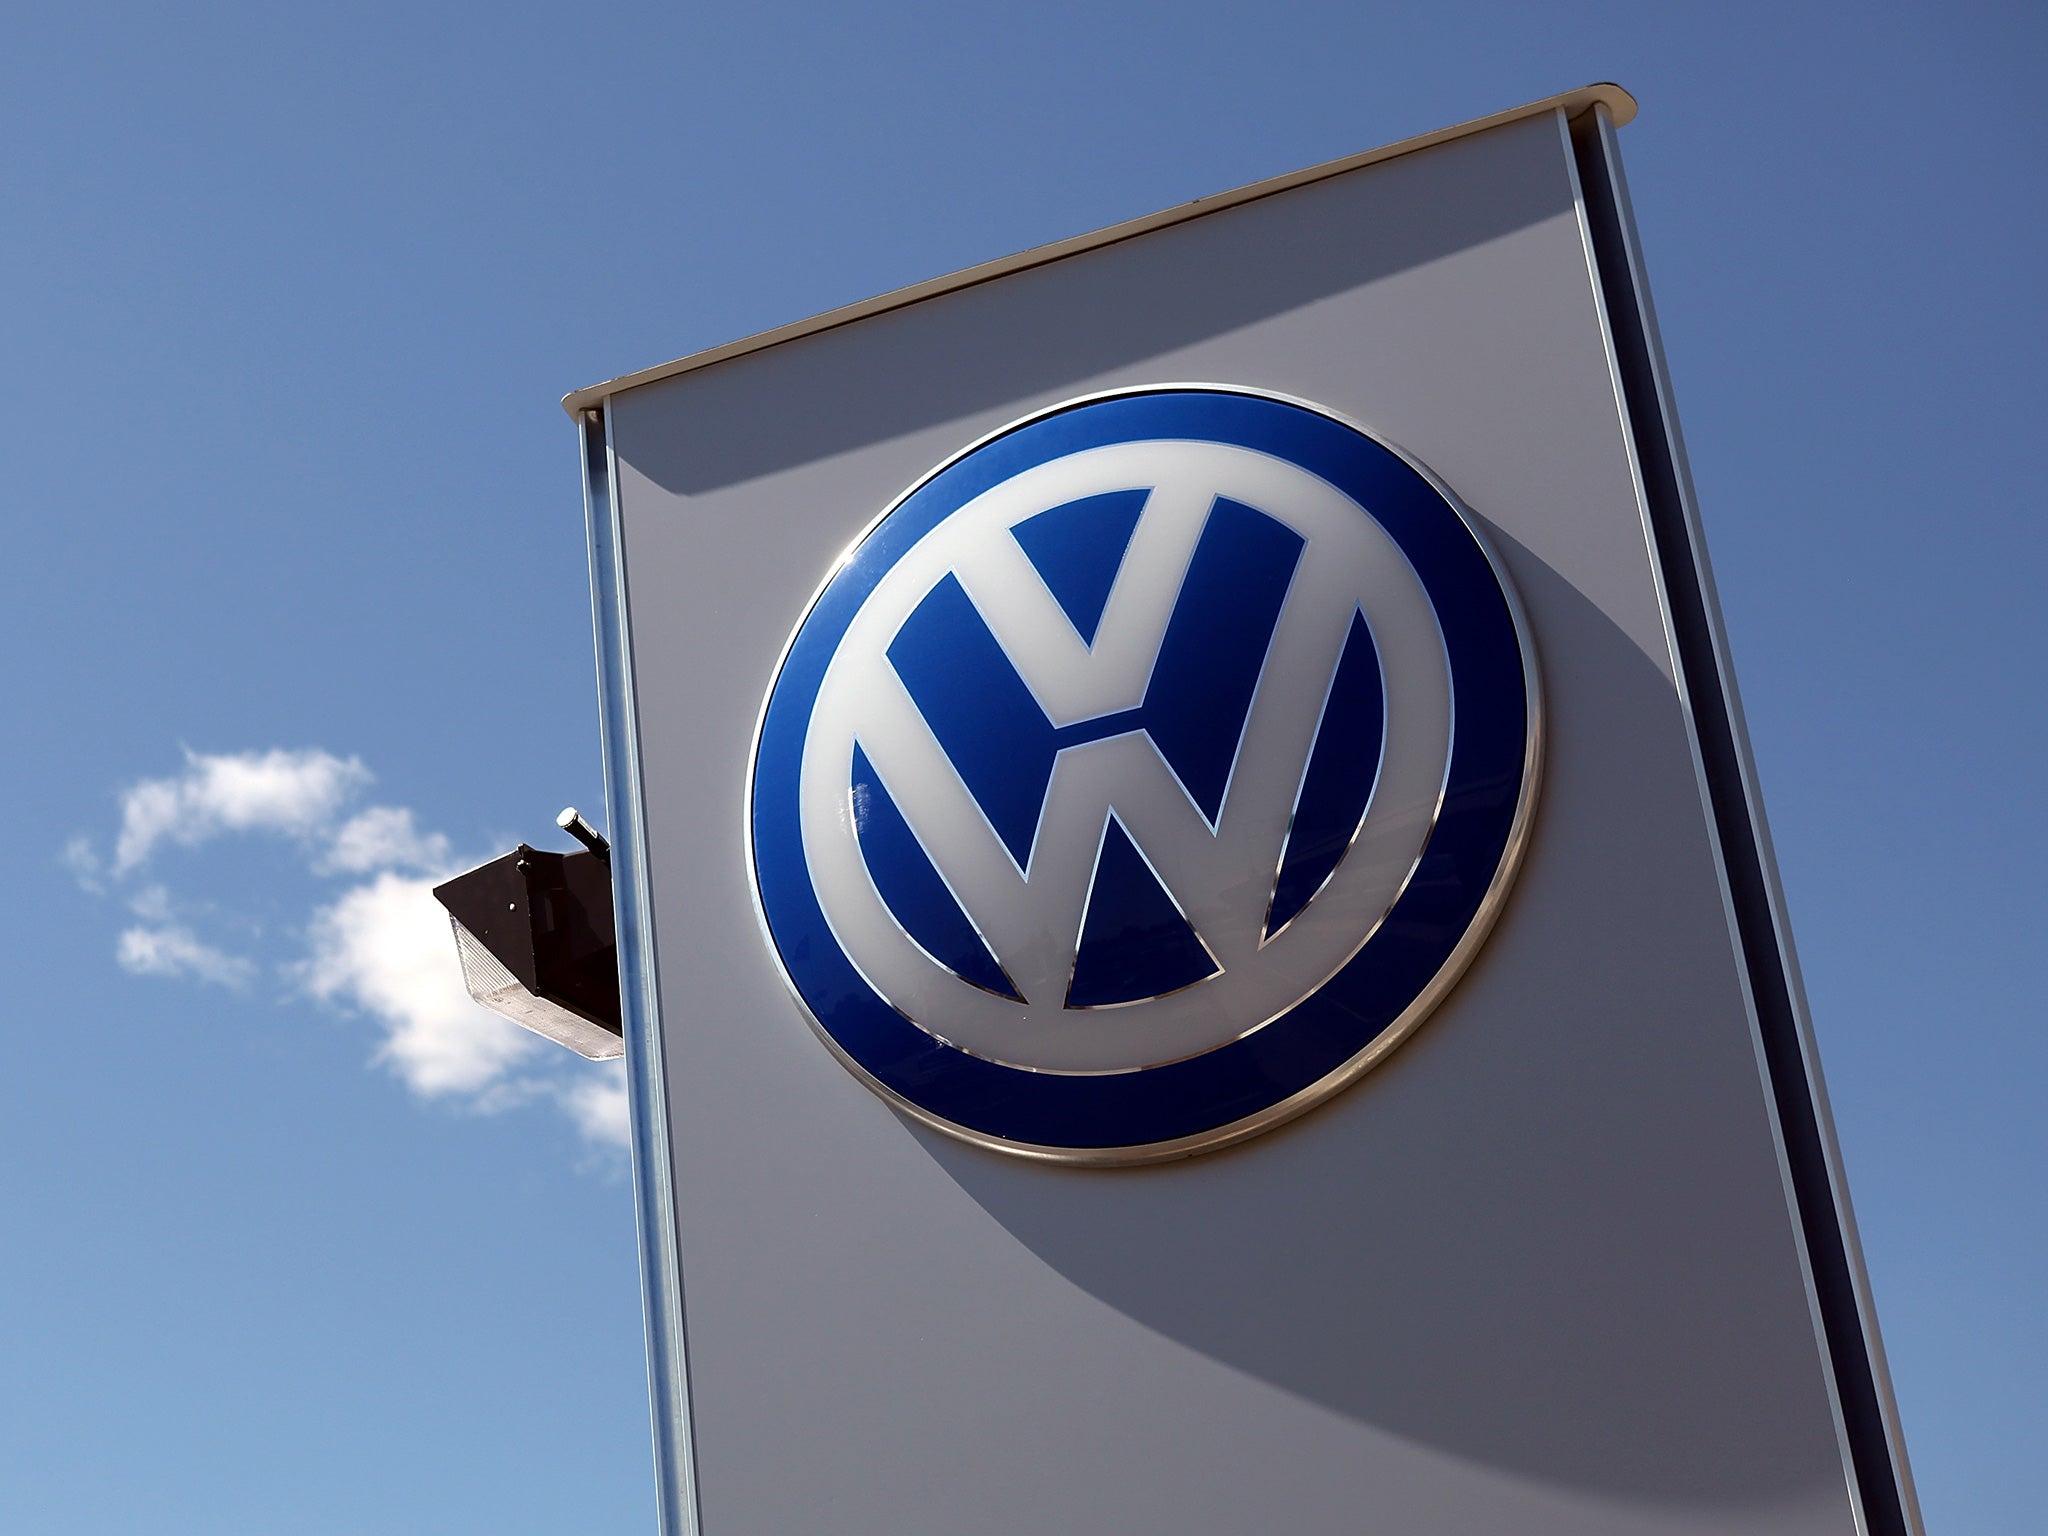 A logo is displayed on a sign in front of a Volkswagen dealership on March 28, 2011 in San Rafael, California